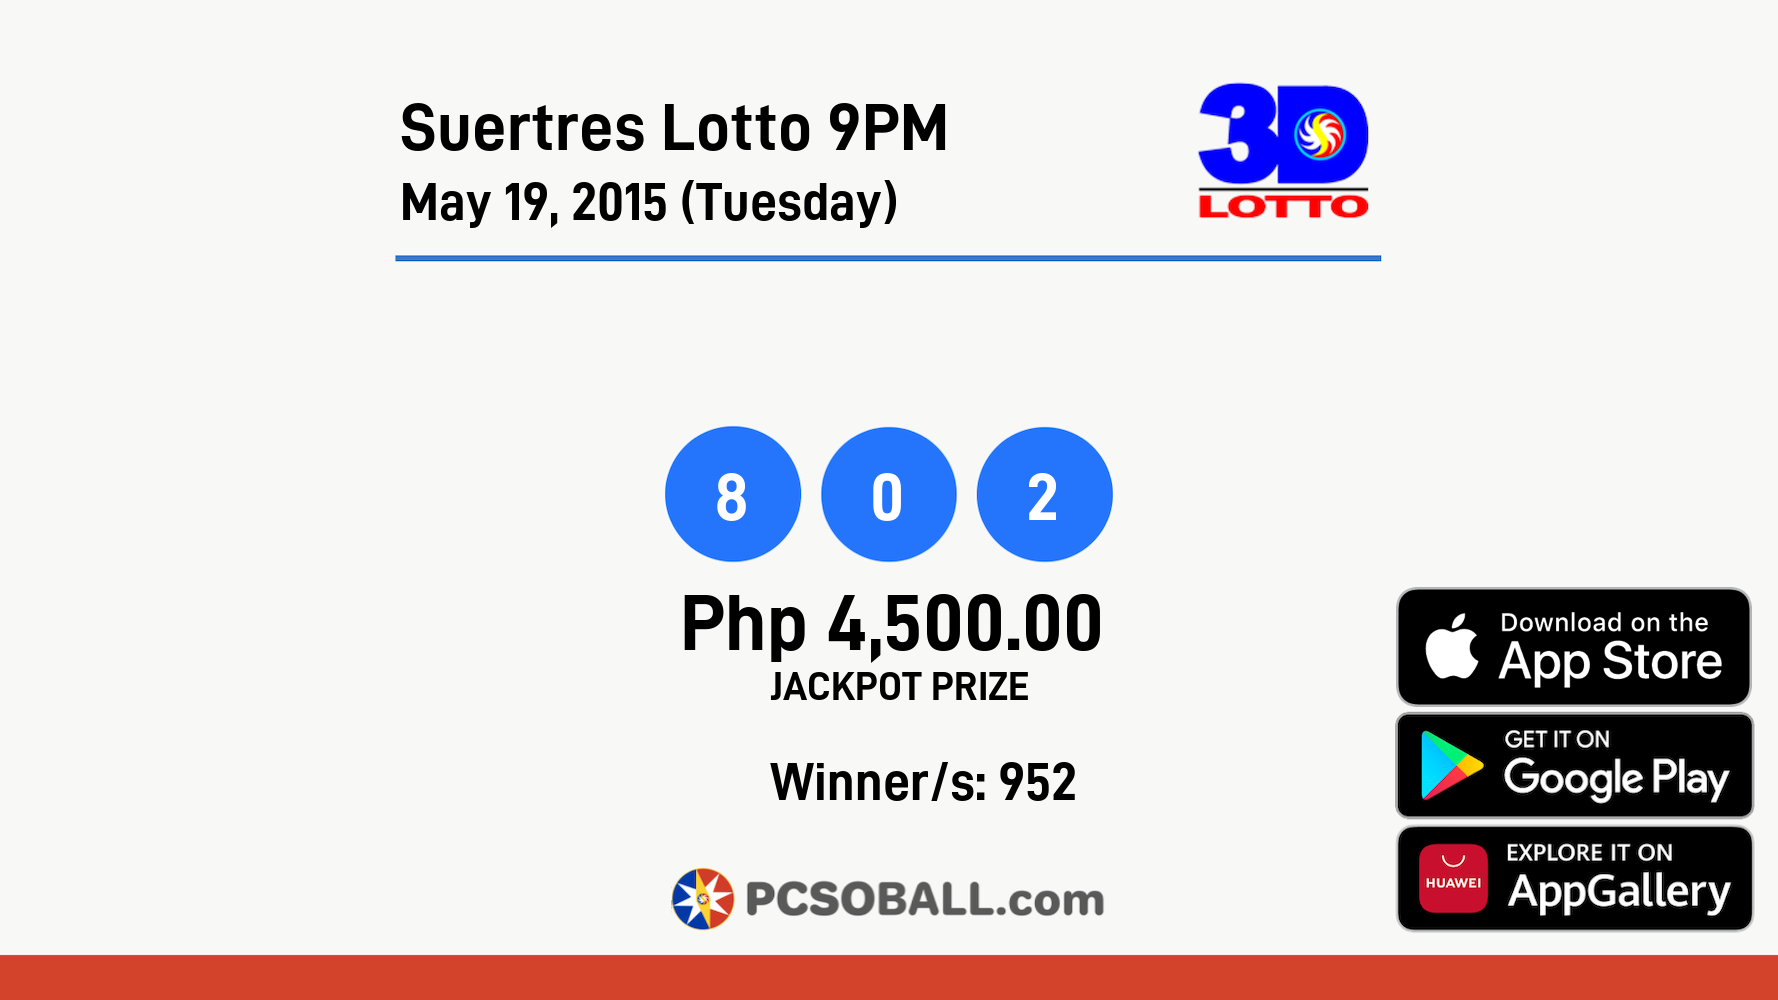 Suertres Lotto 9PM May 19, 2015 (Tuesday) Result